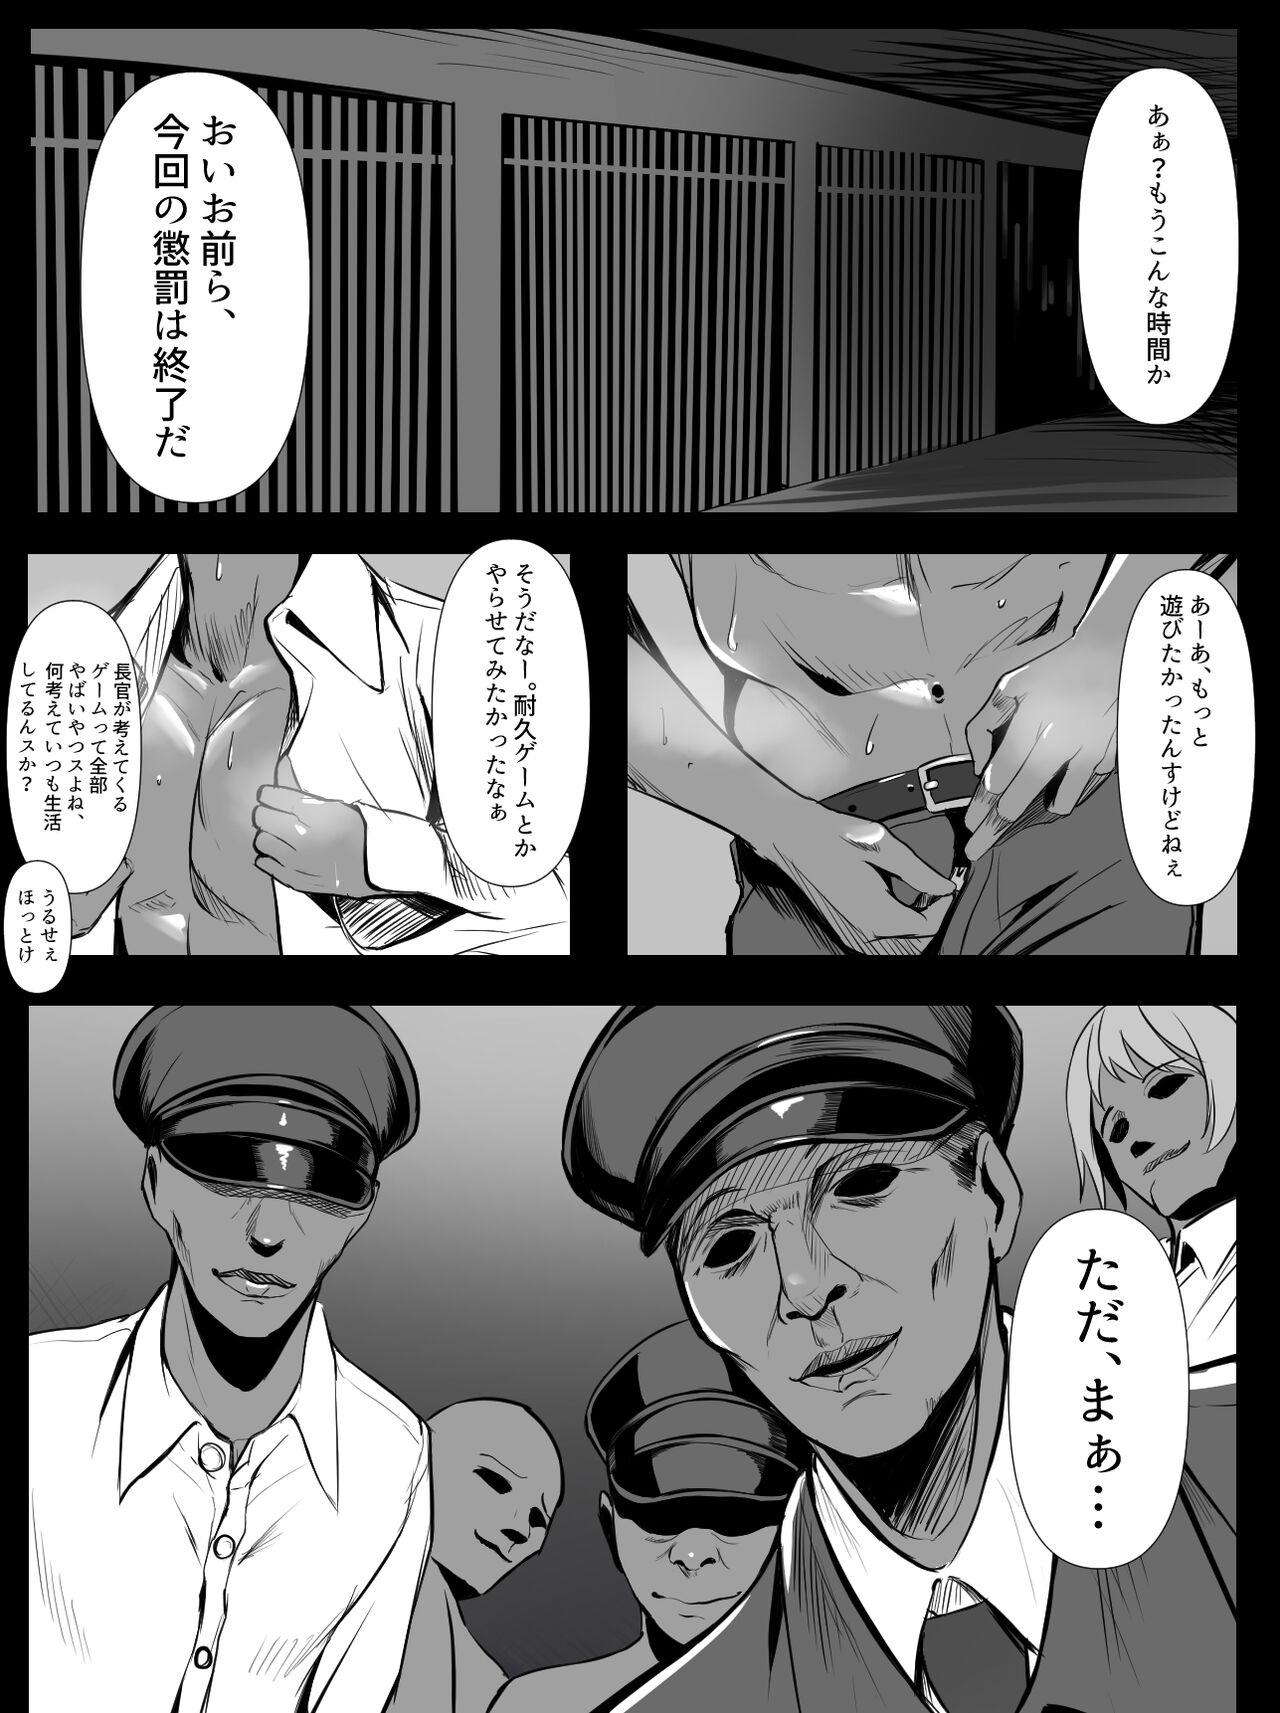 Rough Porn 10月支援者様イラスト - The idolmaster Twink - Page 7